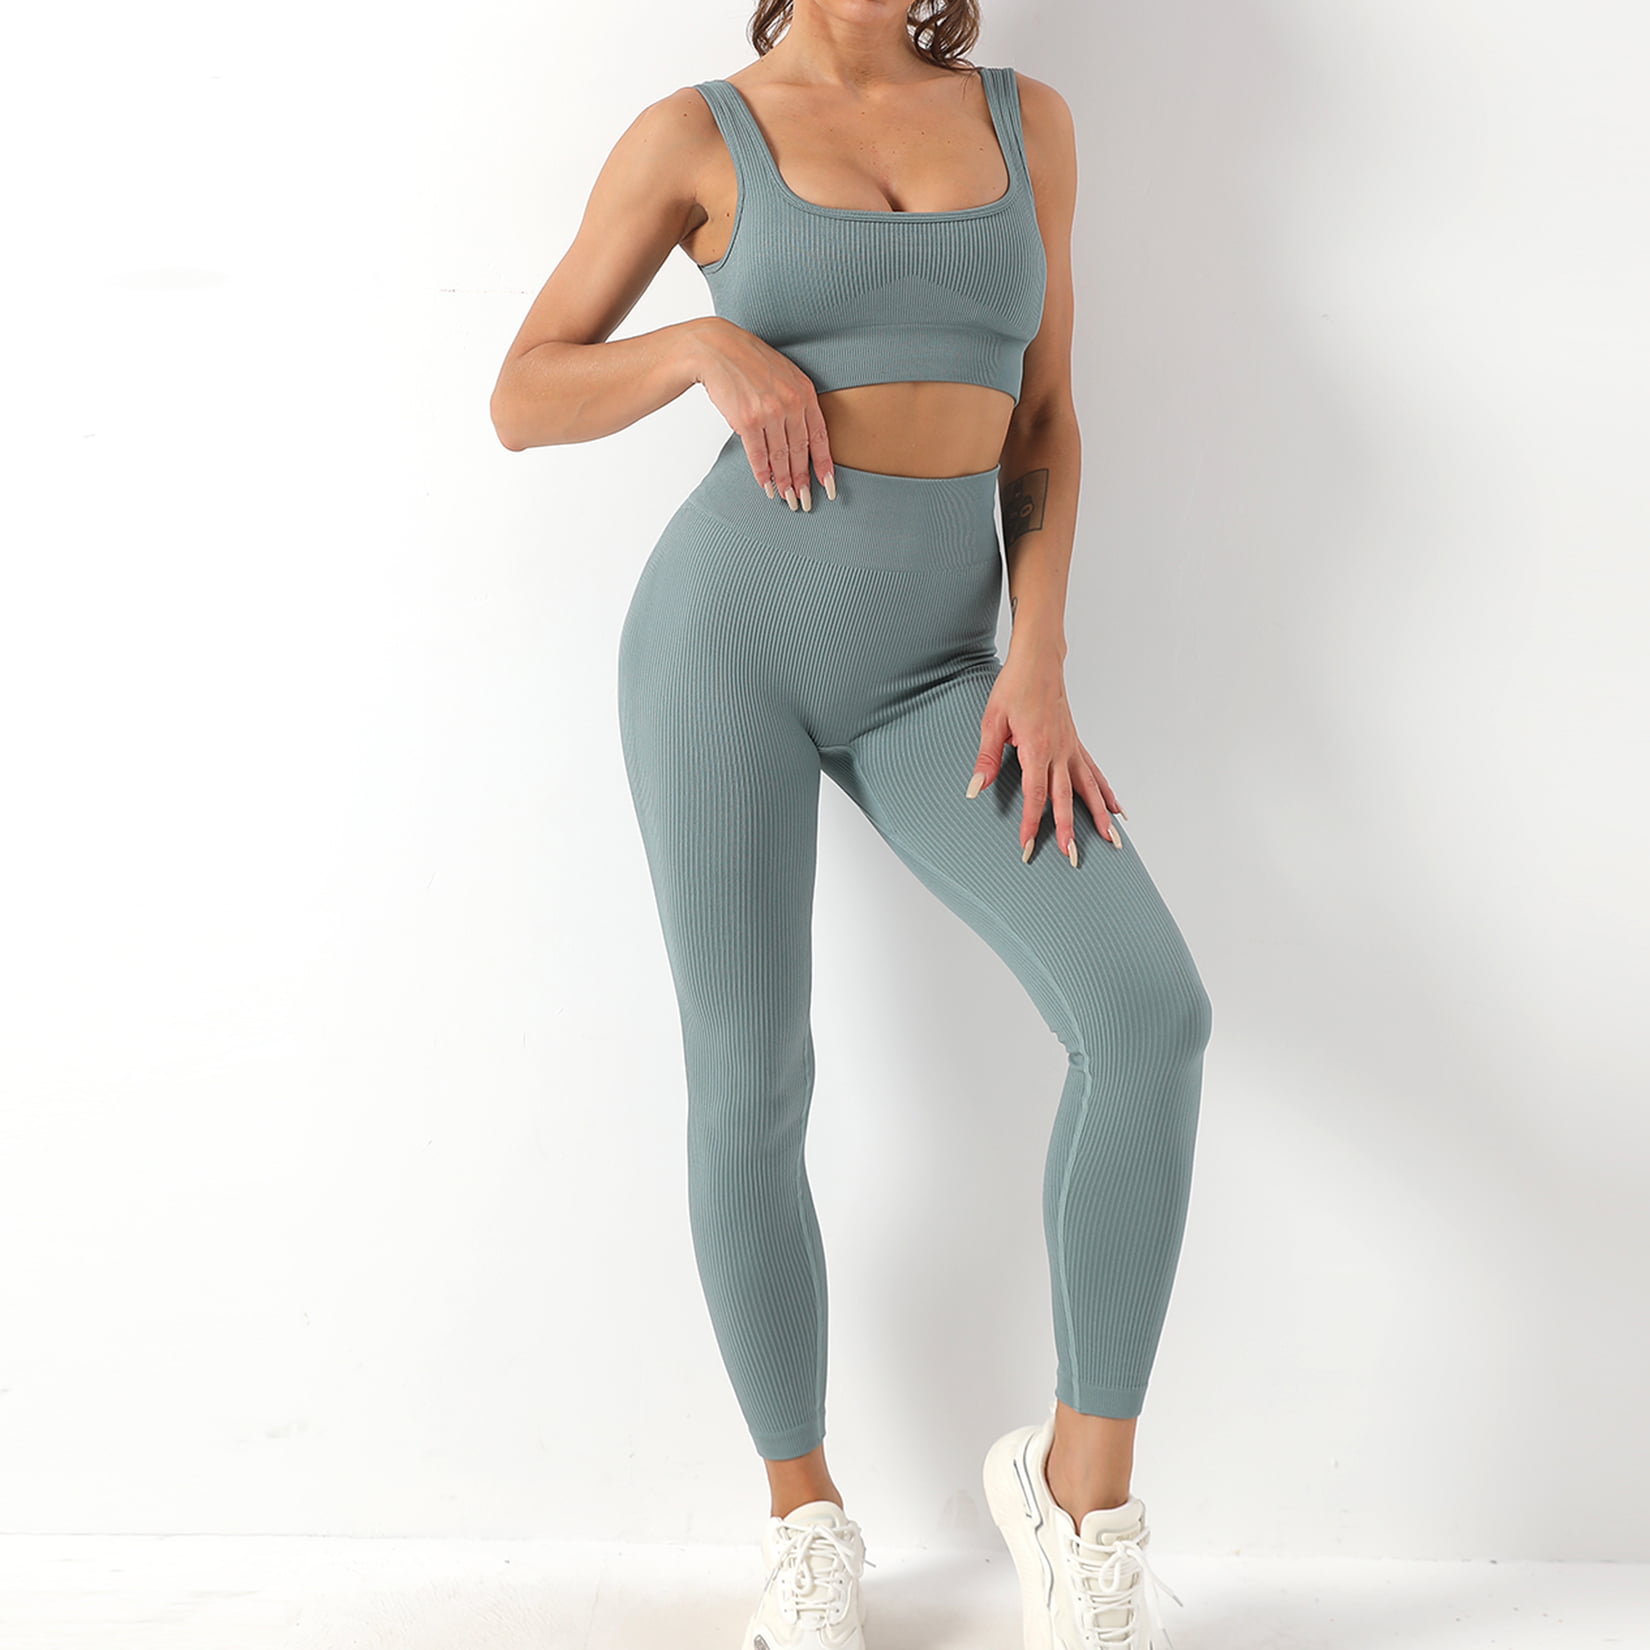 SOLY HUX Women's Workout Sets 2 Piece Yoga Outfit Crop Cami Top and  Leggings Set Solid Light Grey Petite XXS